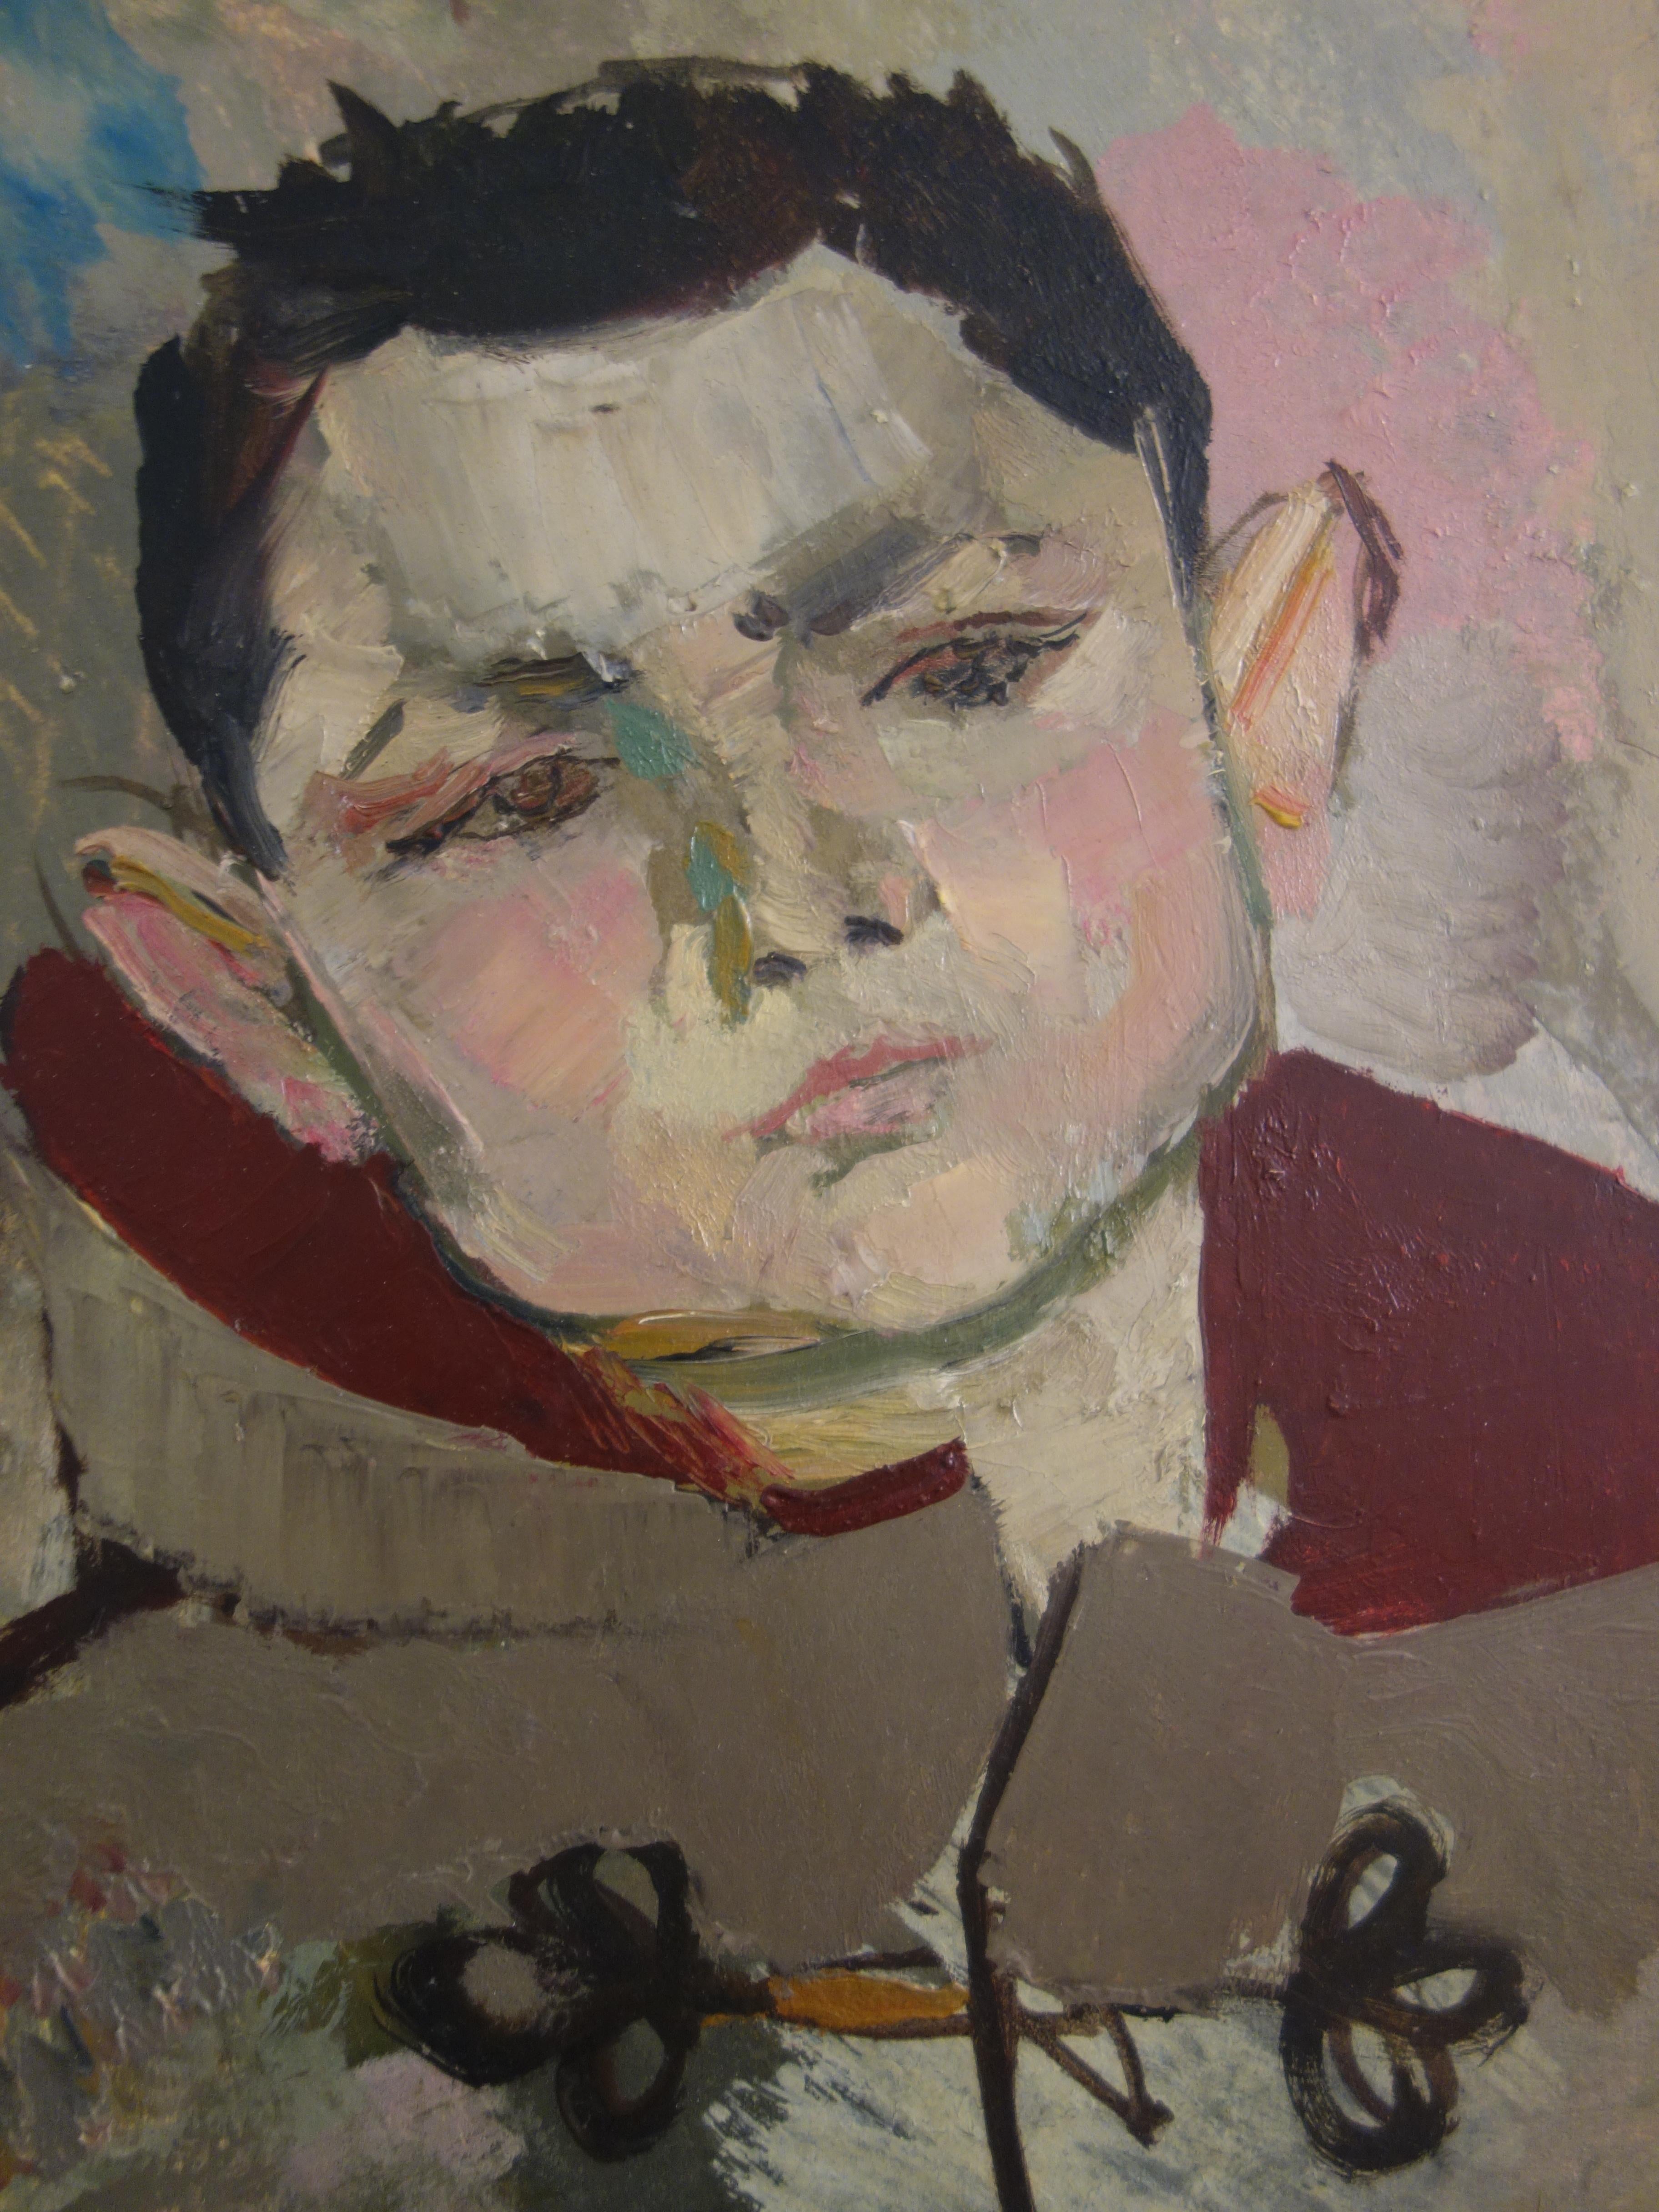 Boy with Duffle Coat - Original hansigned oil on paper - Modern Painting by René Genis